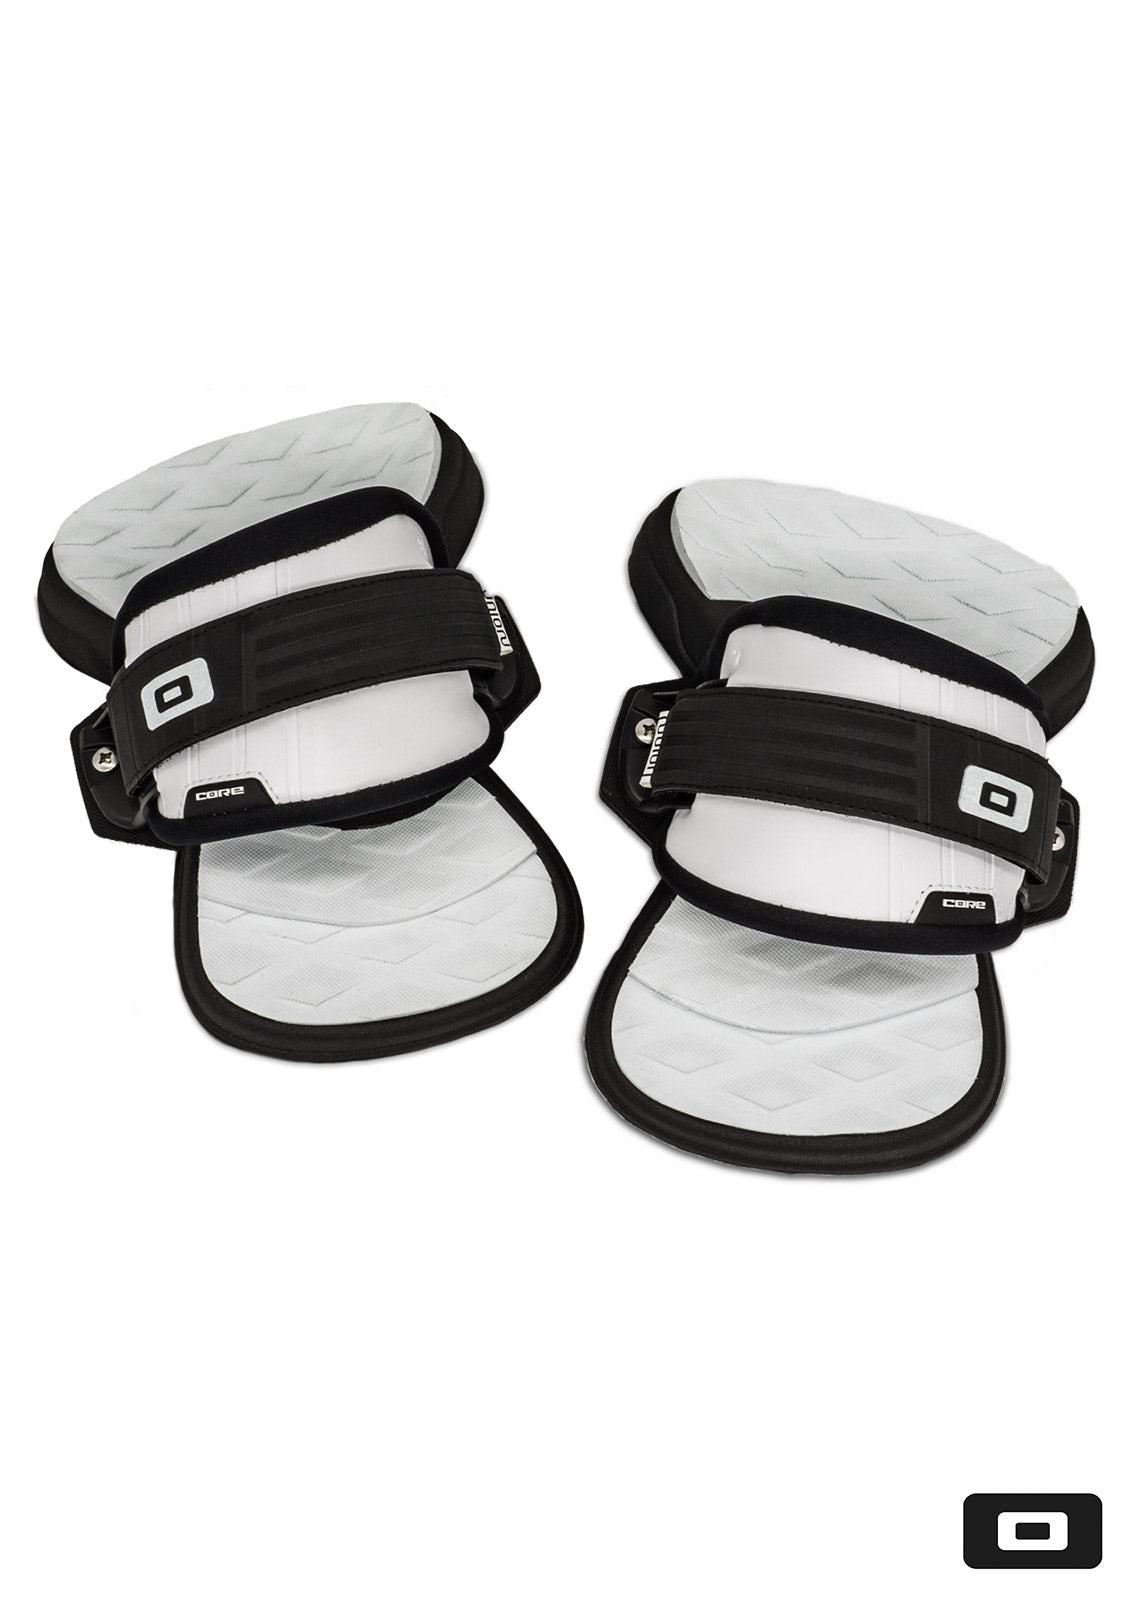 CORE UNION COMFORT 2 PADS AND STRAPS